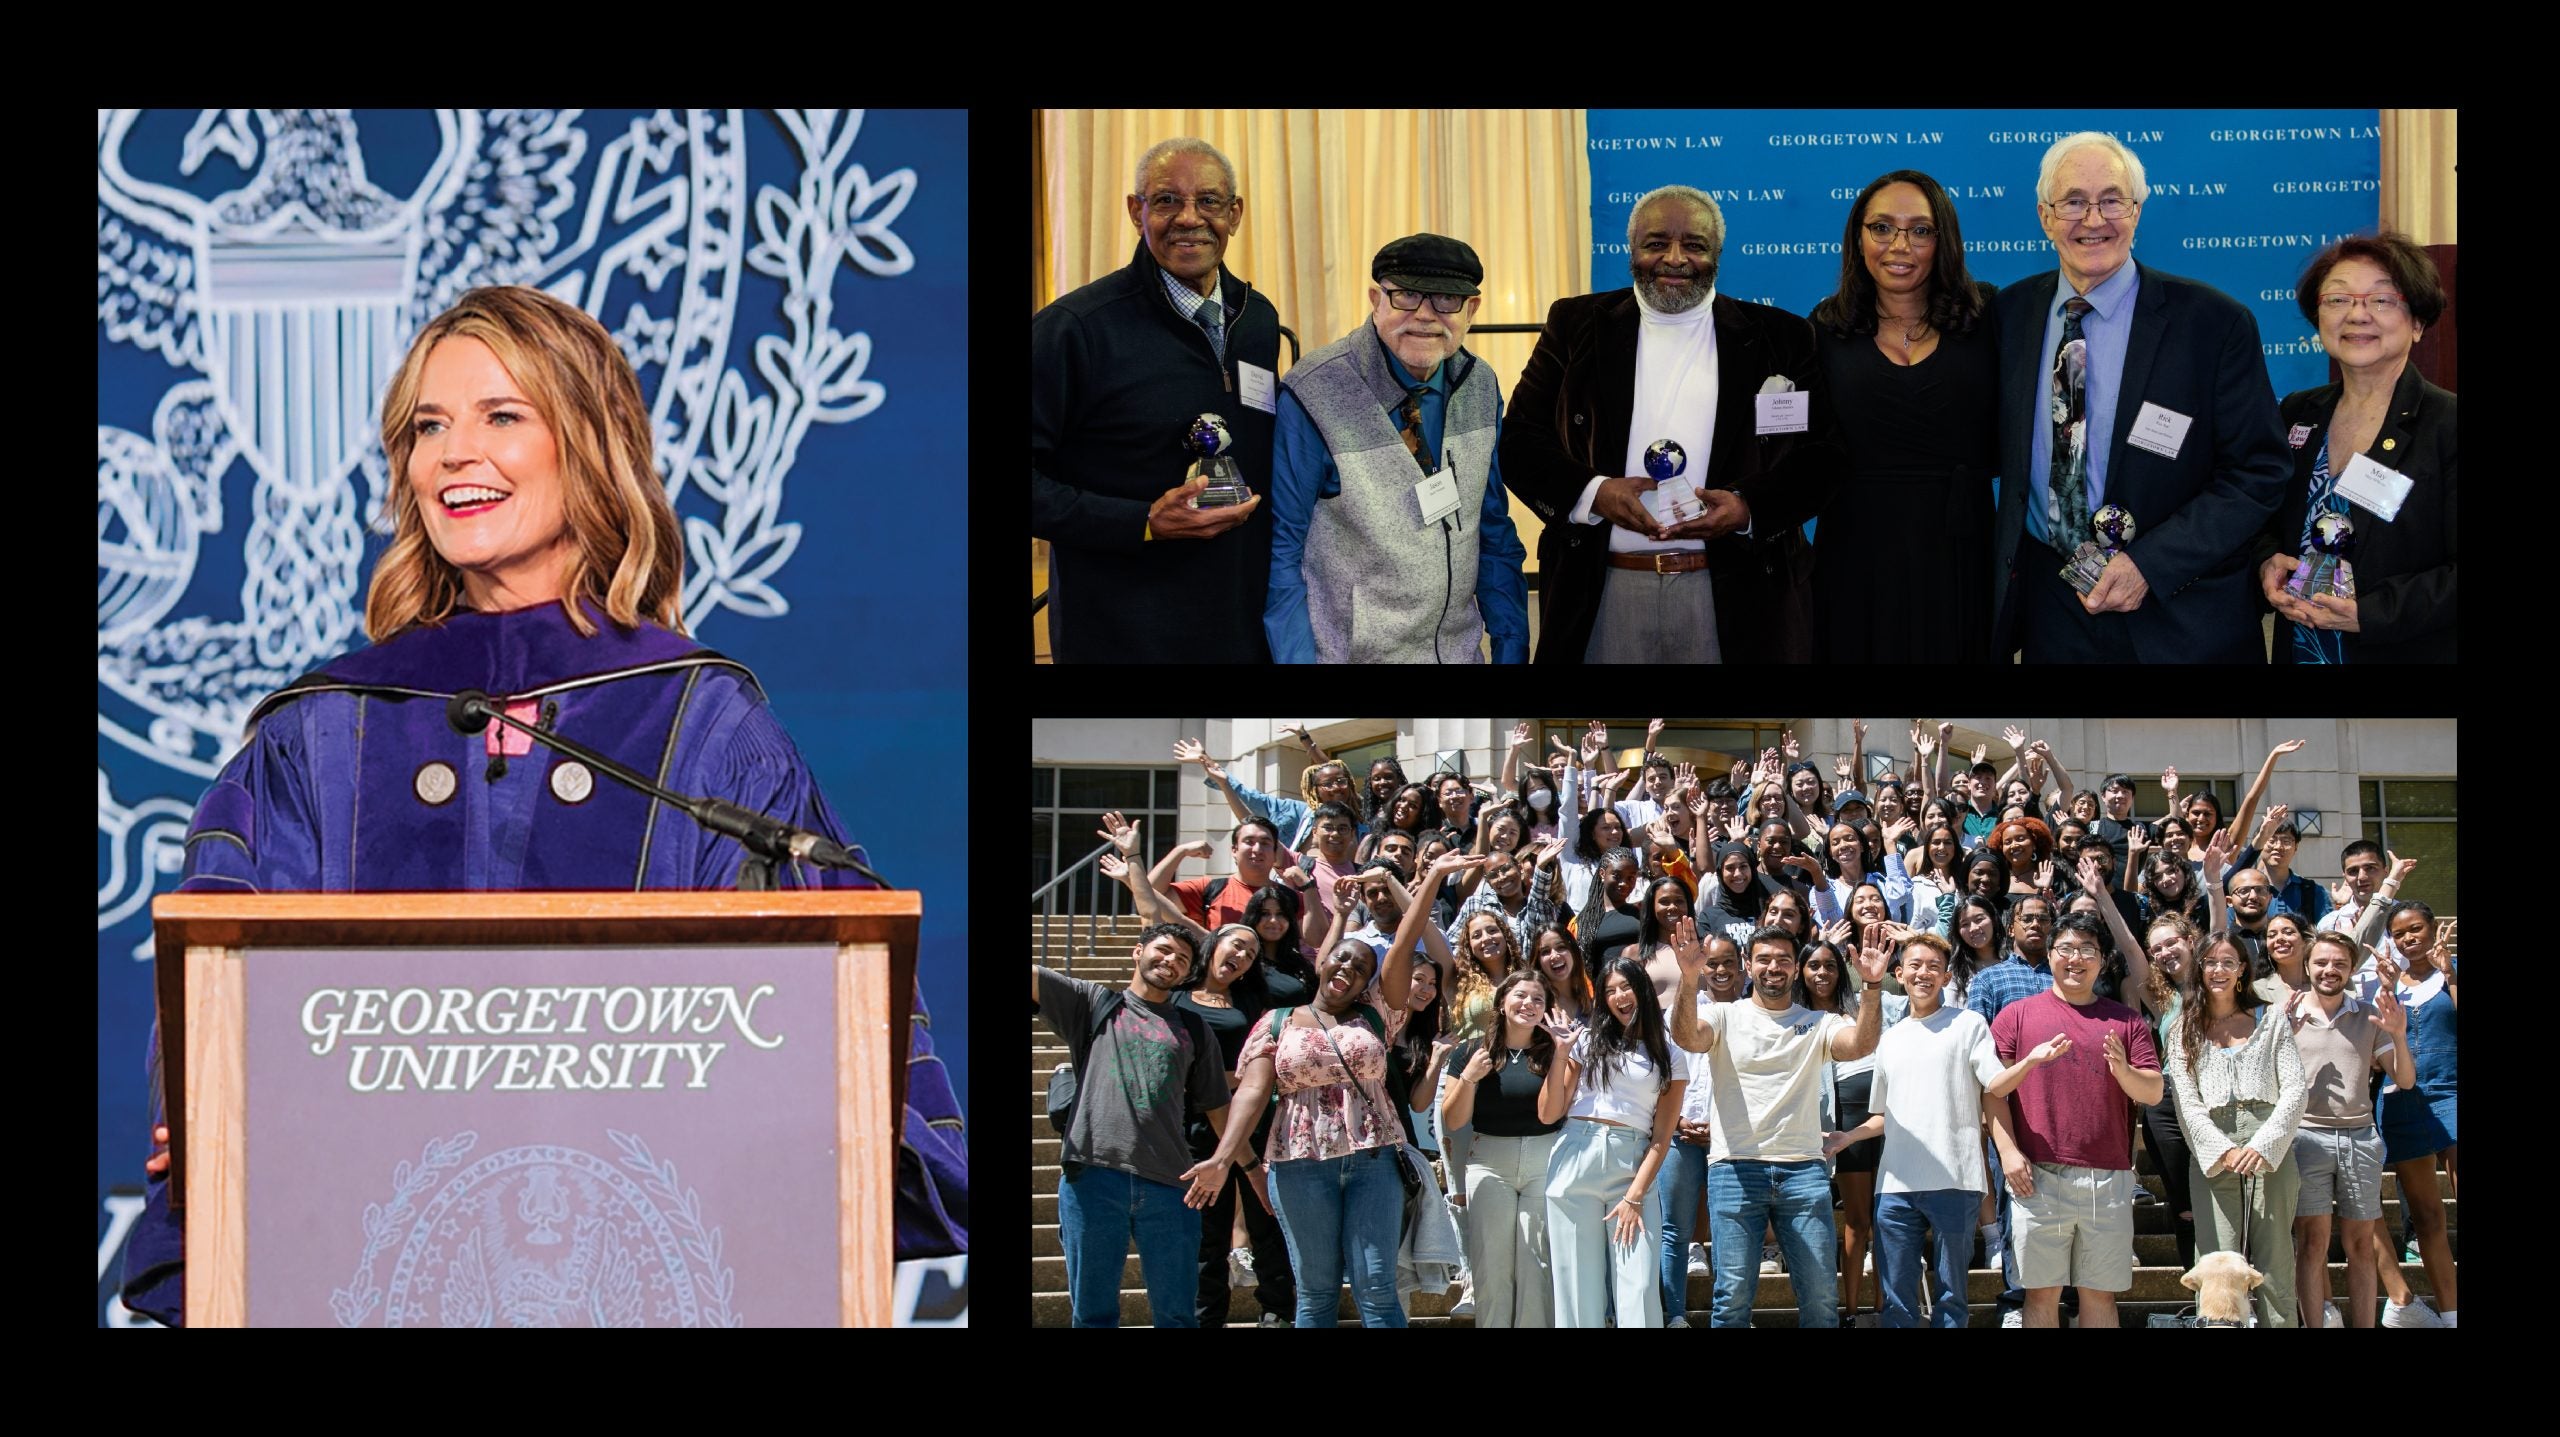 Clockwise from left: Commencement speaker Savannah Guthrie; founders and leaders of the Georgetown Street Law Program; students who attended a pre-orientation week organized by RISE.